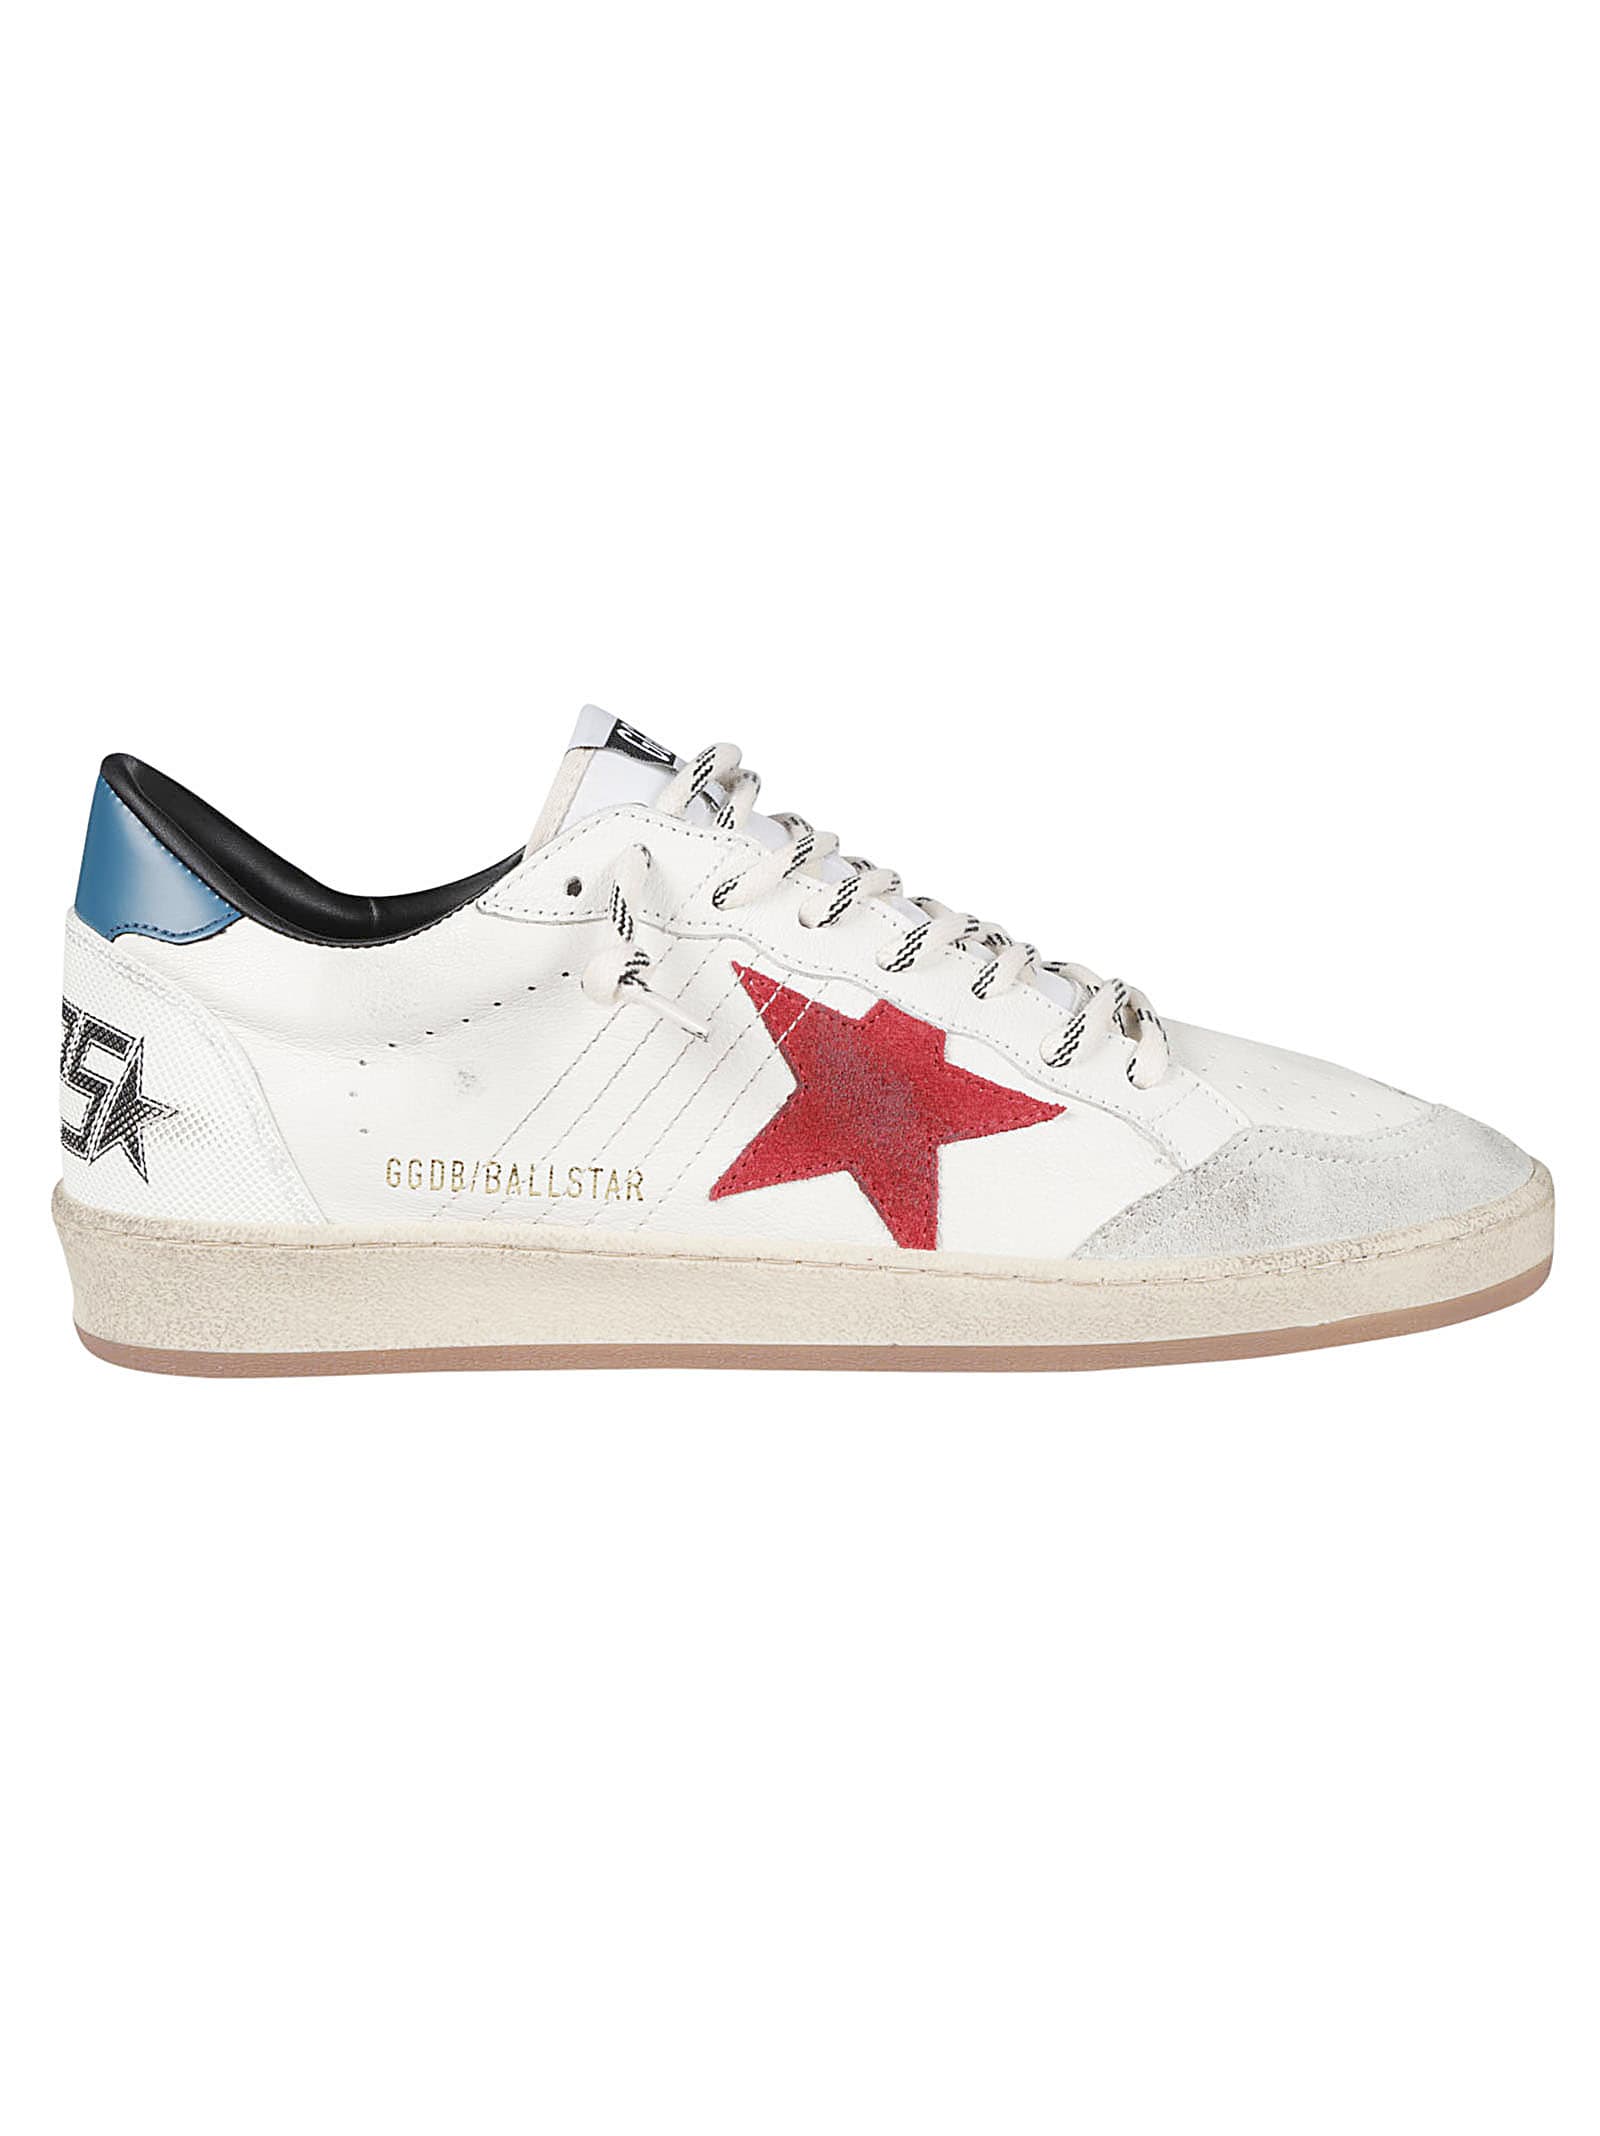 Golden Goose Ball Star Sneakers In White/red/ice